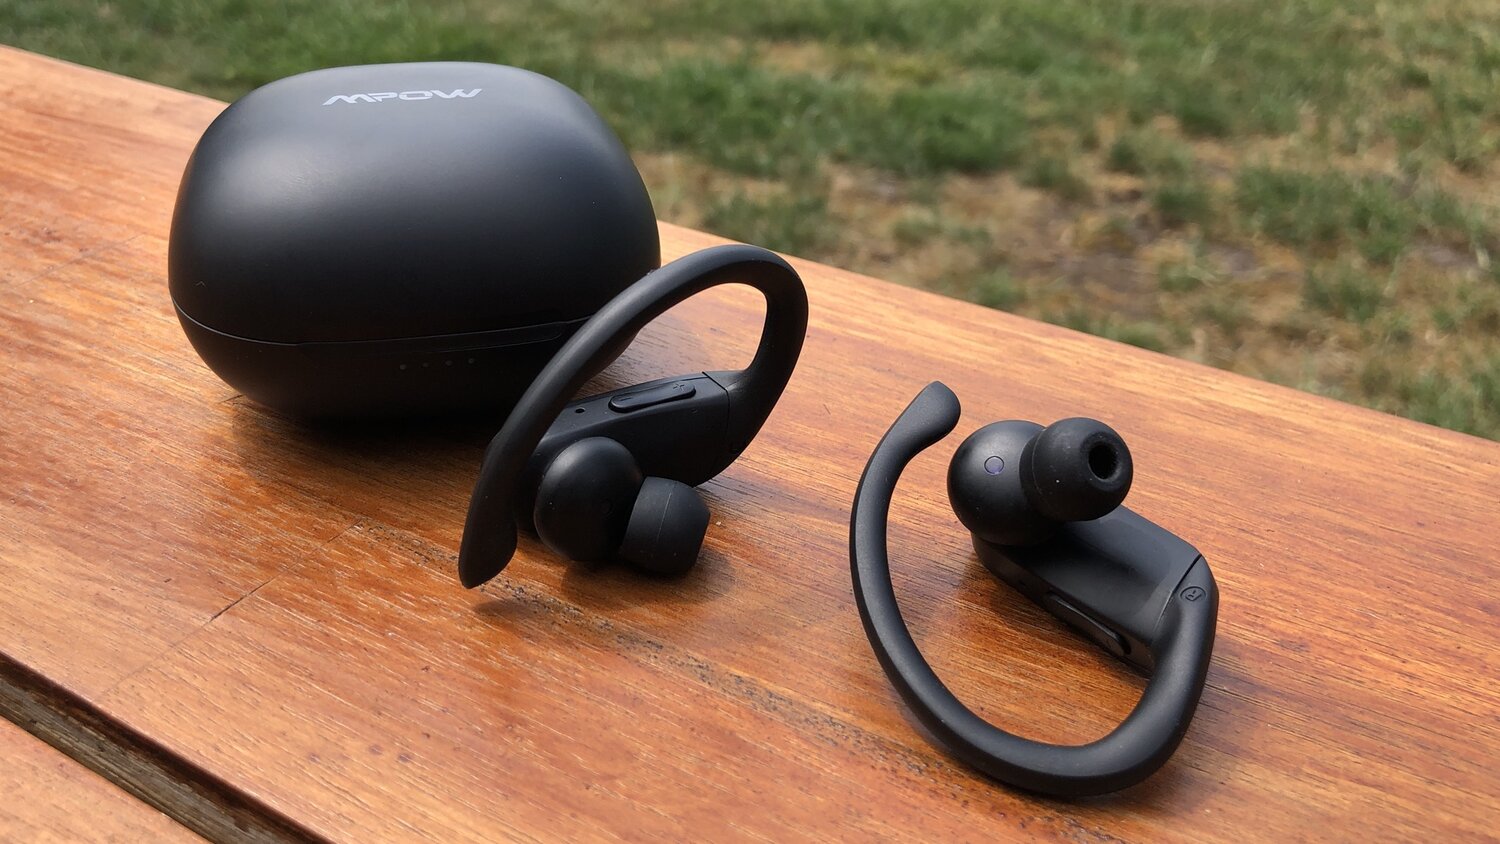 Mpow Flame Pro review: Wireless sports earbuds great for calls